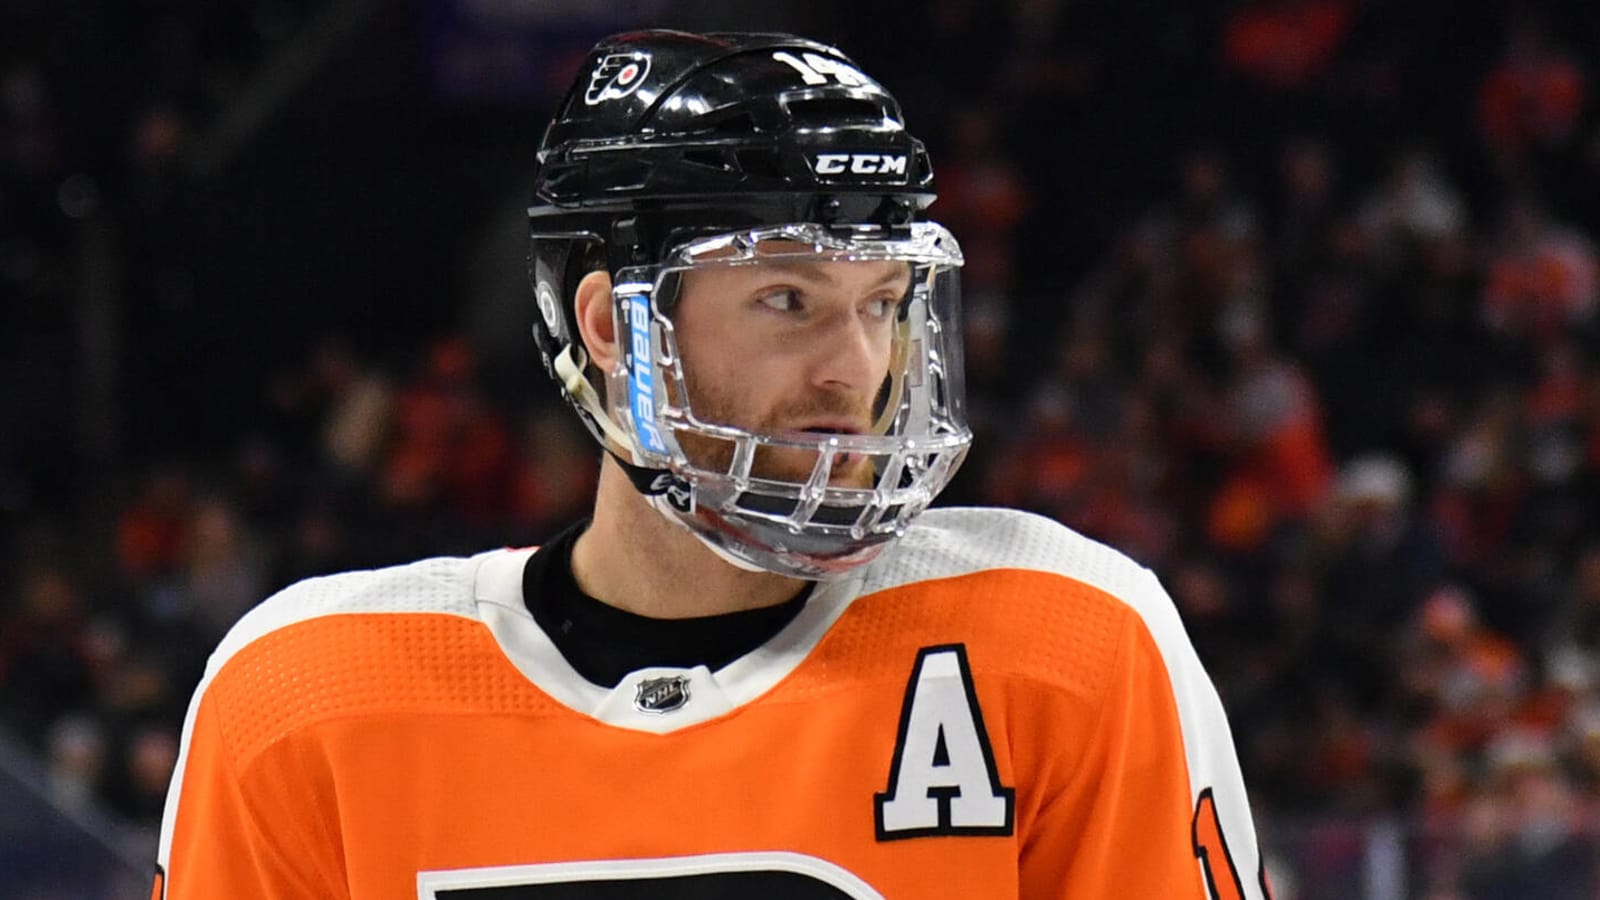 Flyers star center Sean Couturier will not require surgery